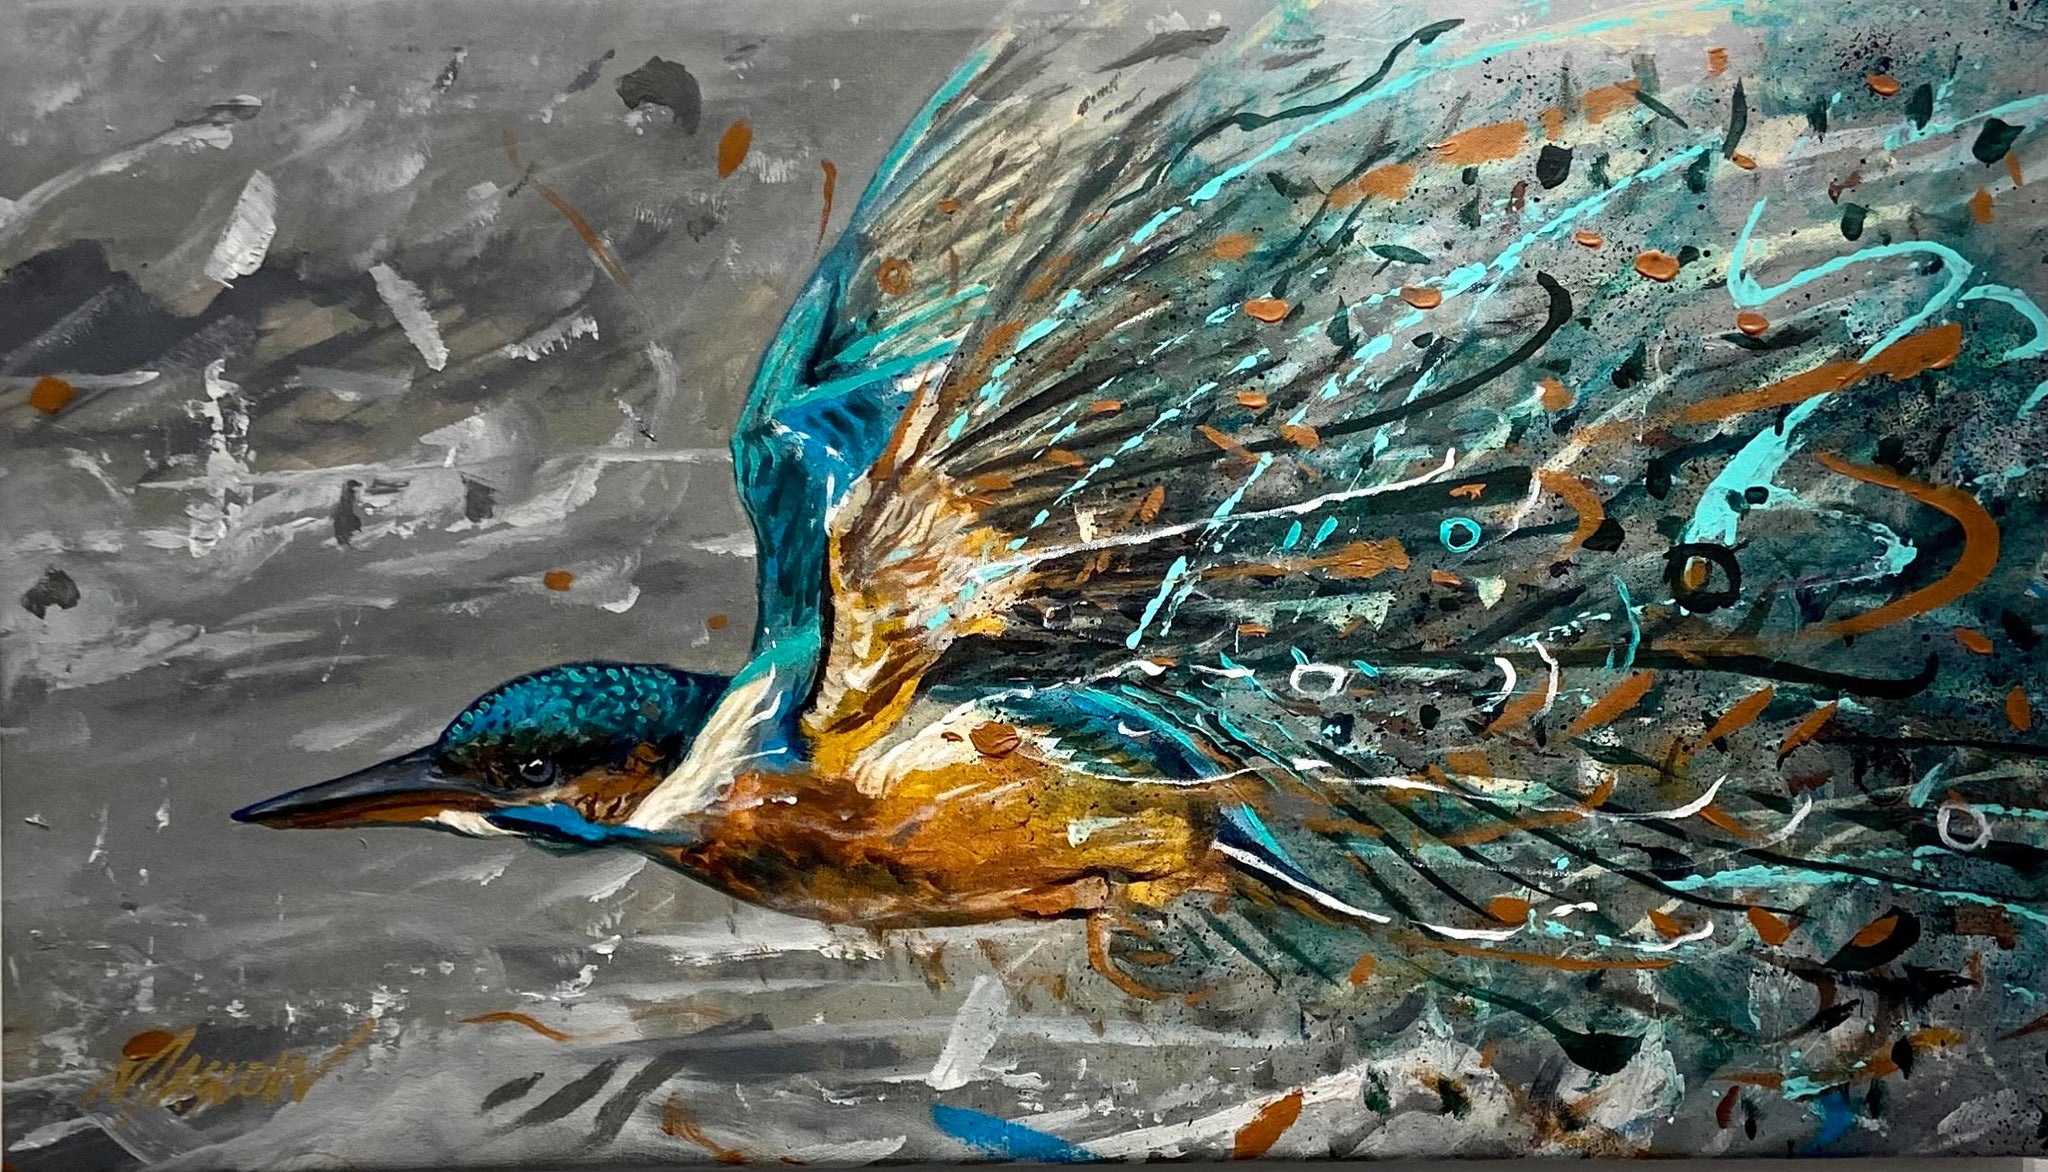 Exploding Kingfisher by Maslow